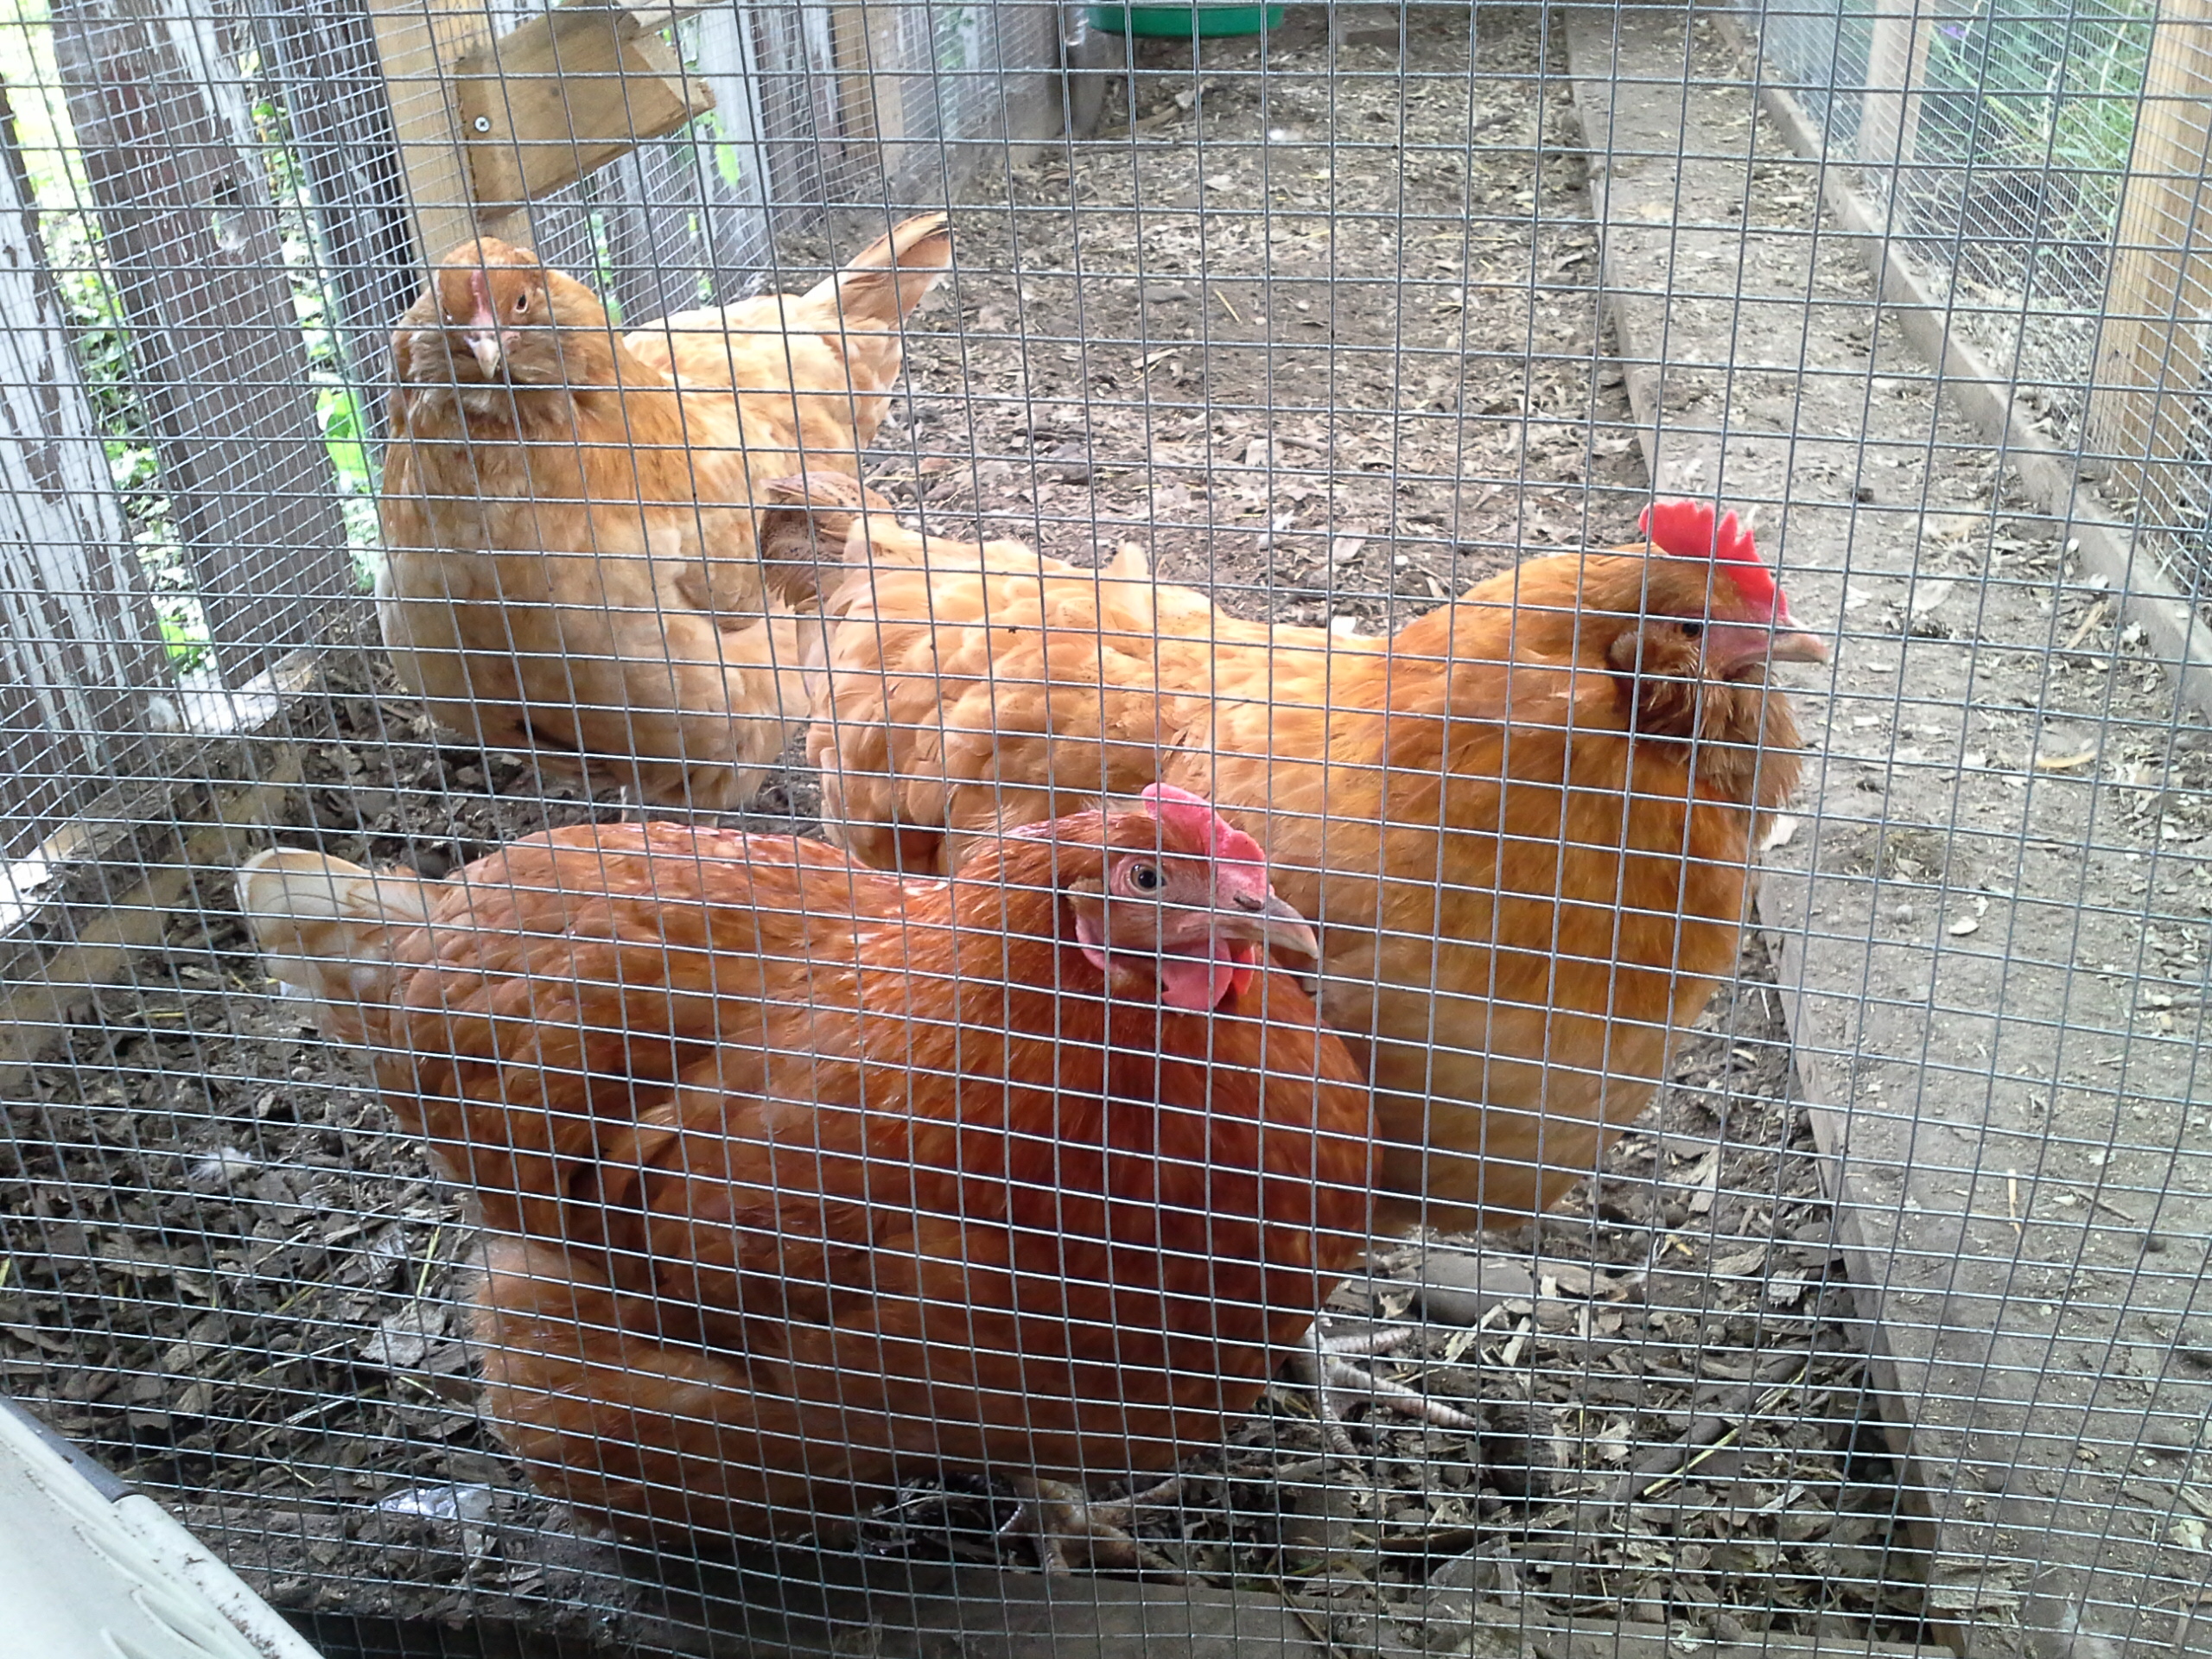 Ethel, Gladys, and Mildred.  June 2014